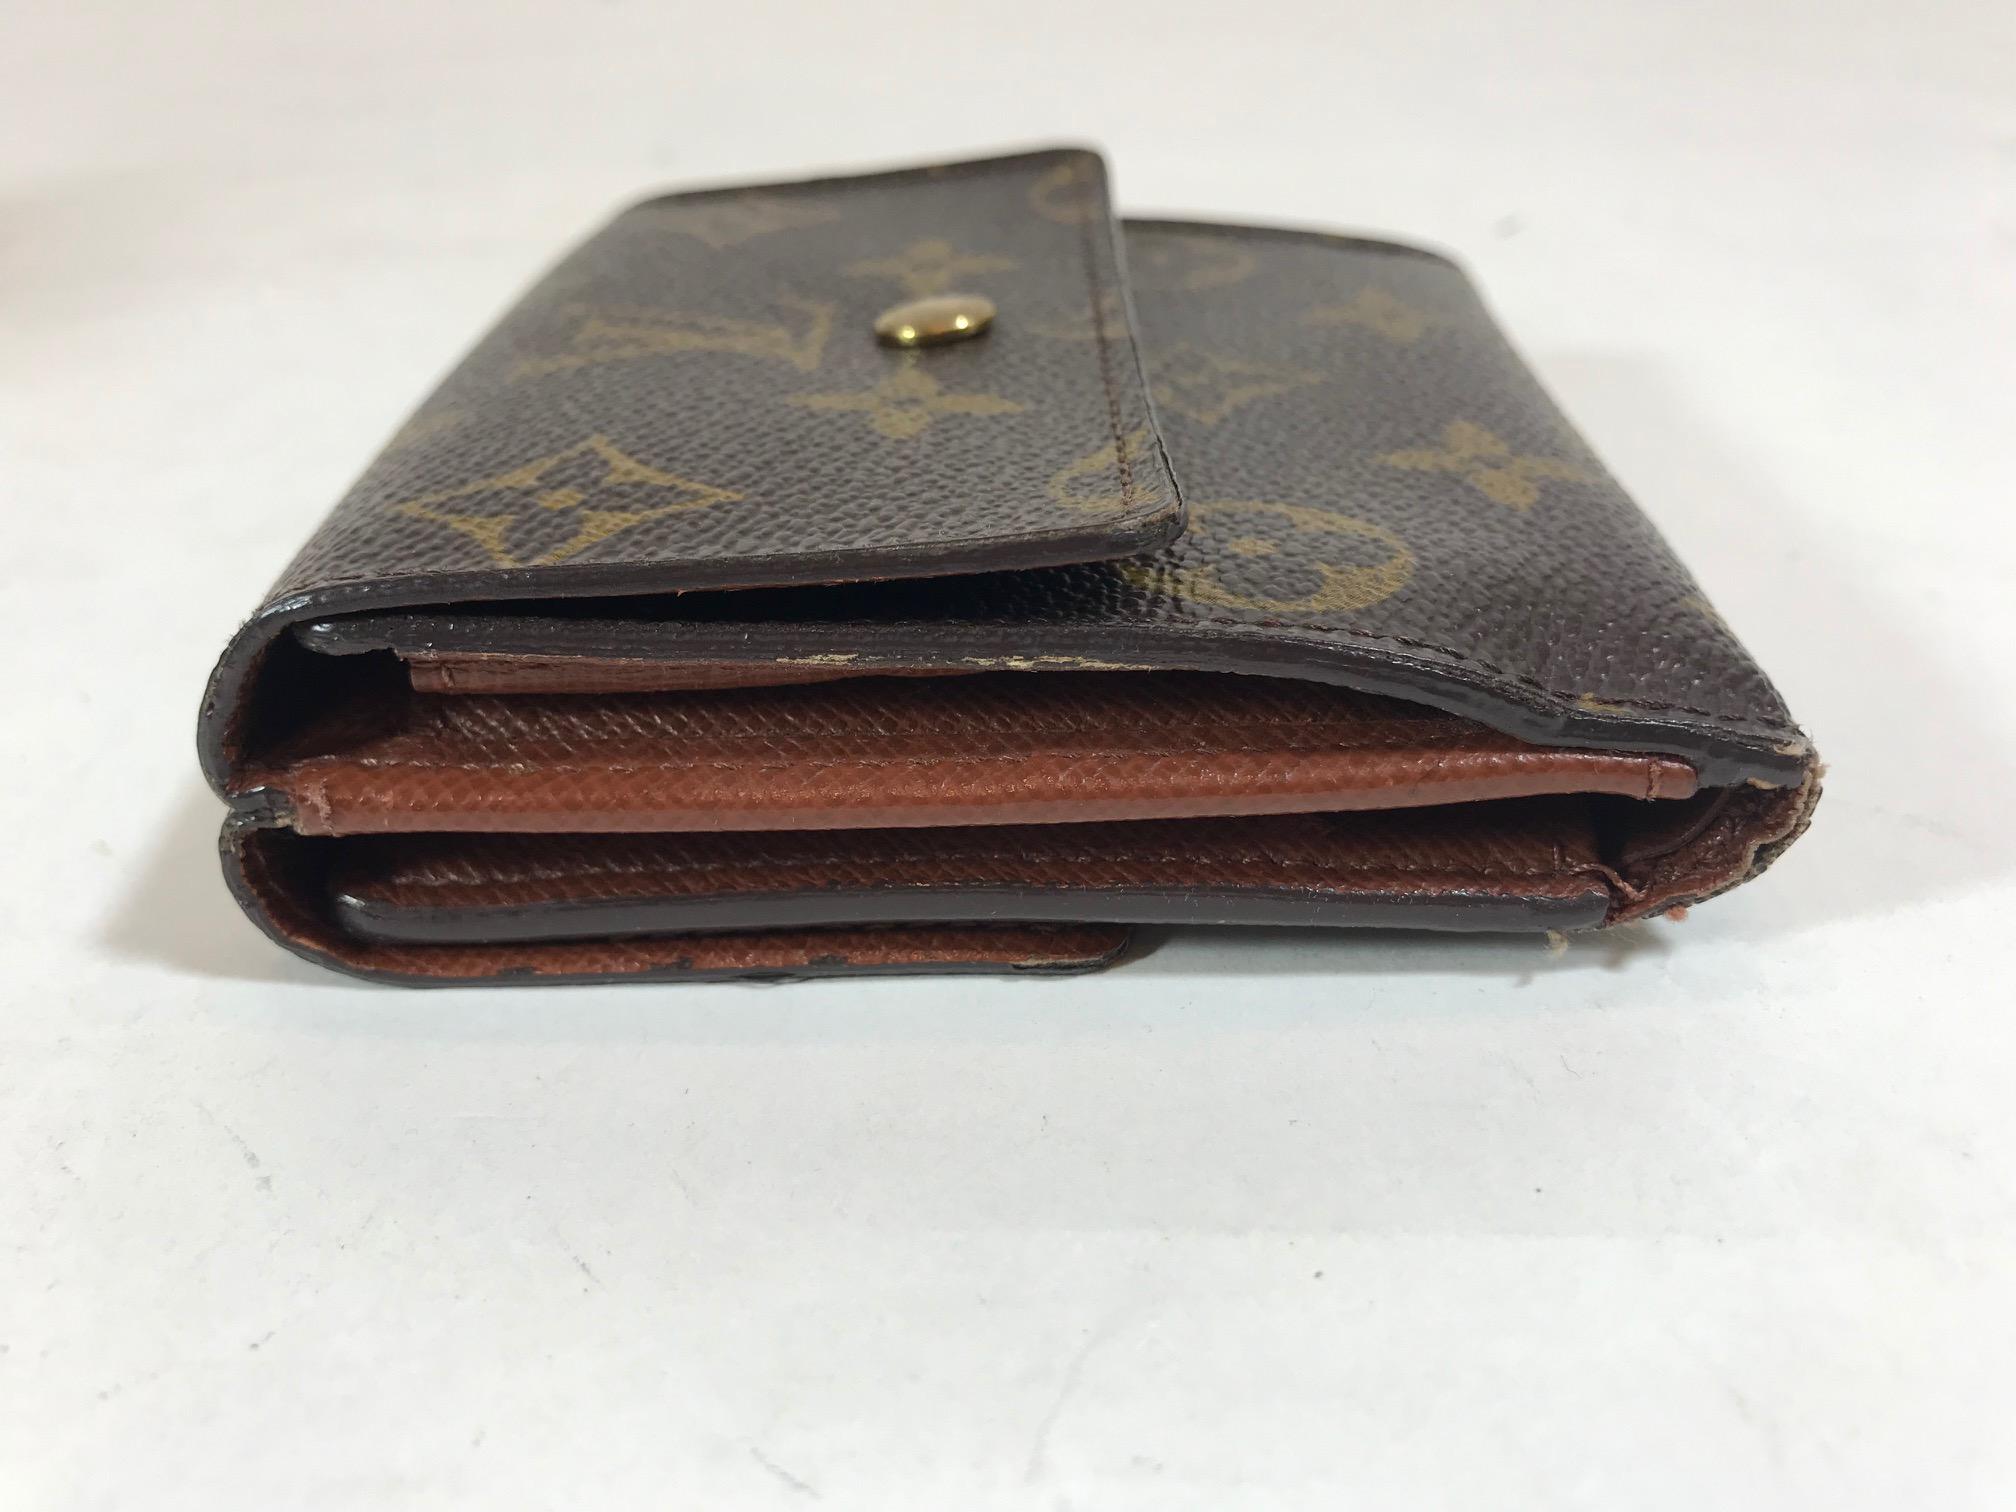 Brown and tan monogram compact wallet. Brass hardware, single compartment at front featuring snap closure, tonal leather lining, single bill compartment at interior walls, six card slots and snap closure at back. Estimated Retail Price: $630